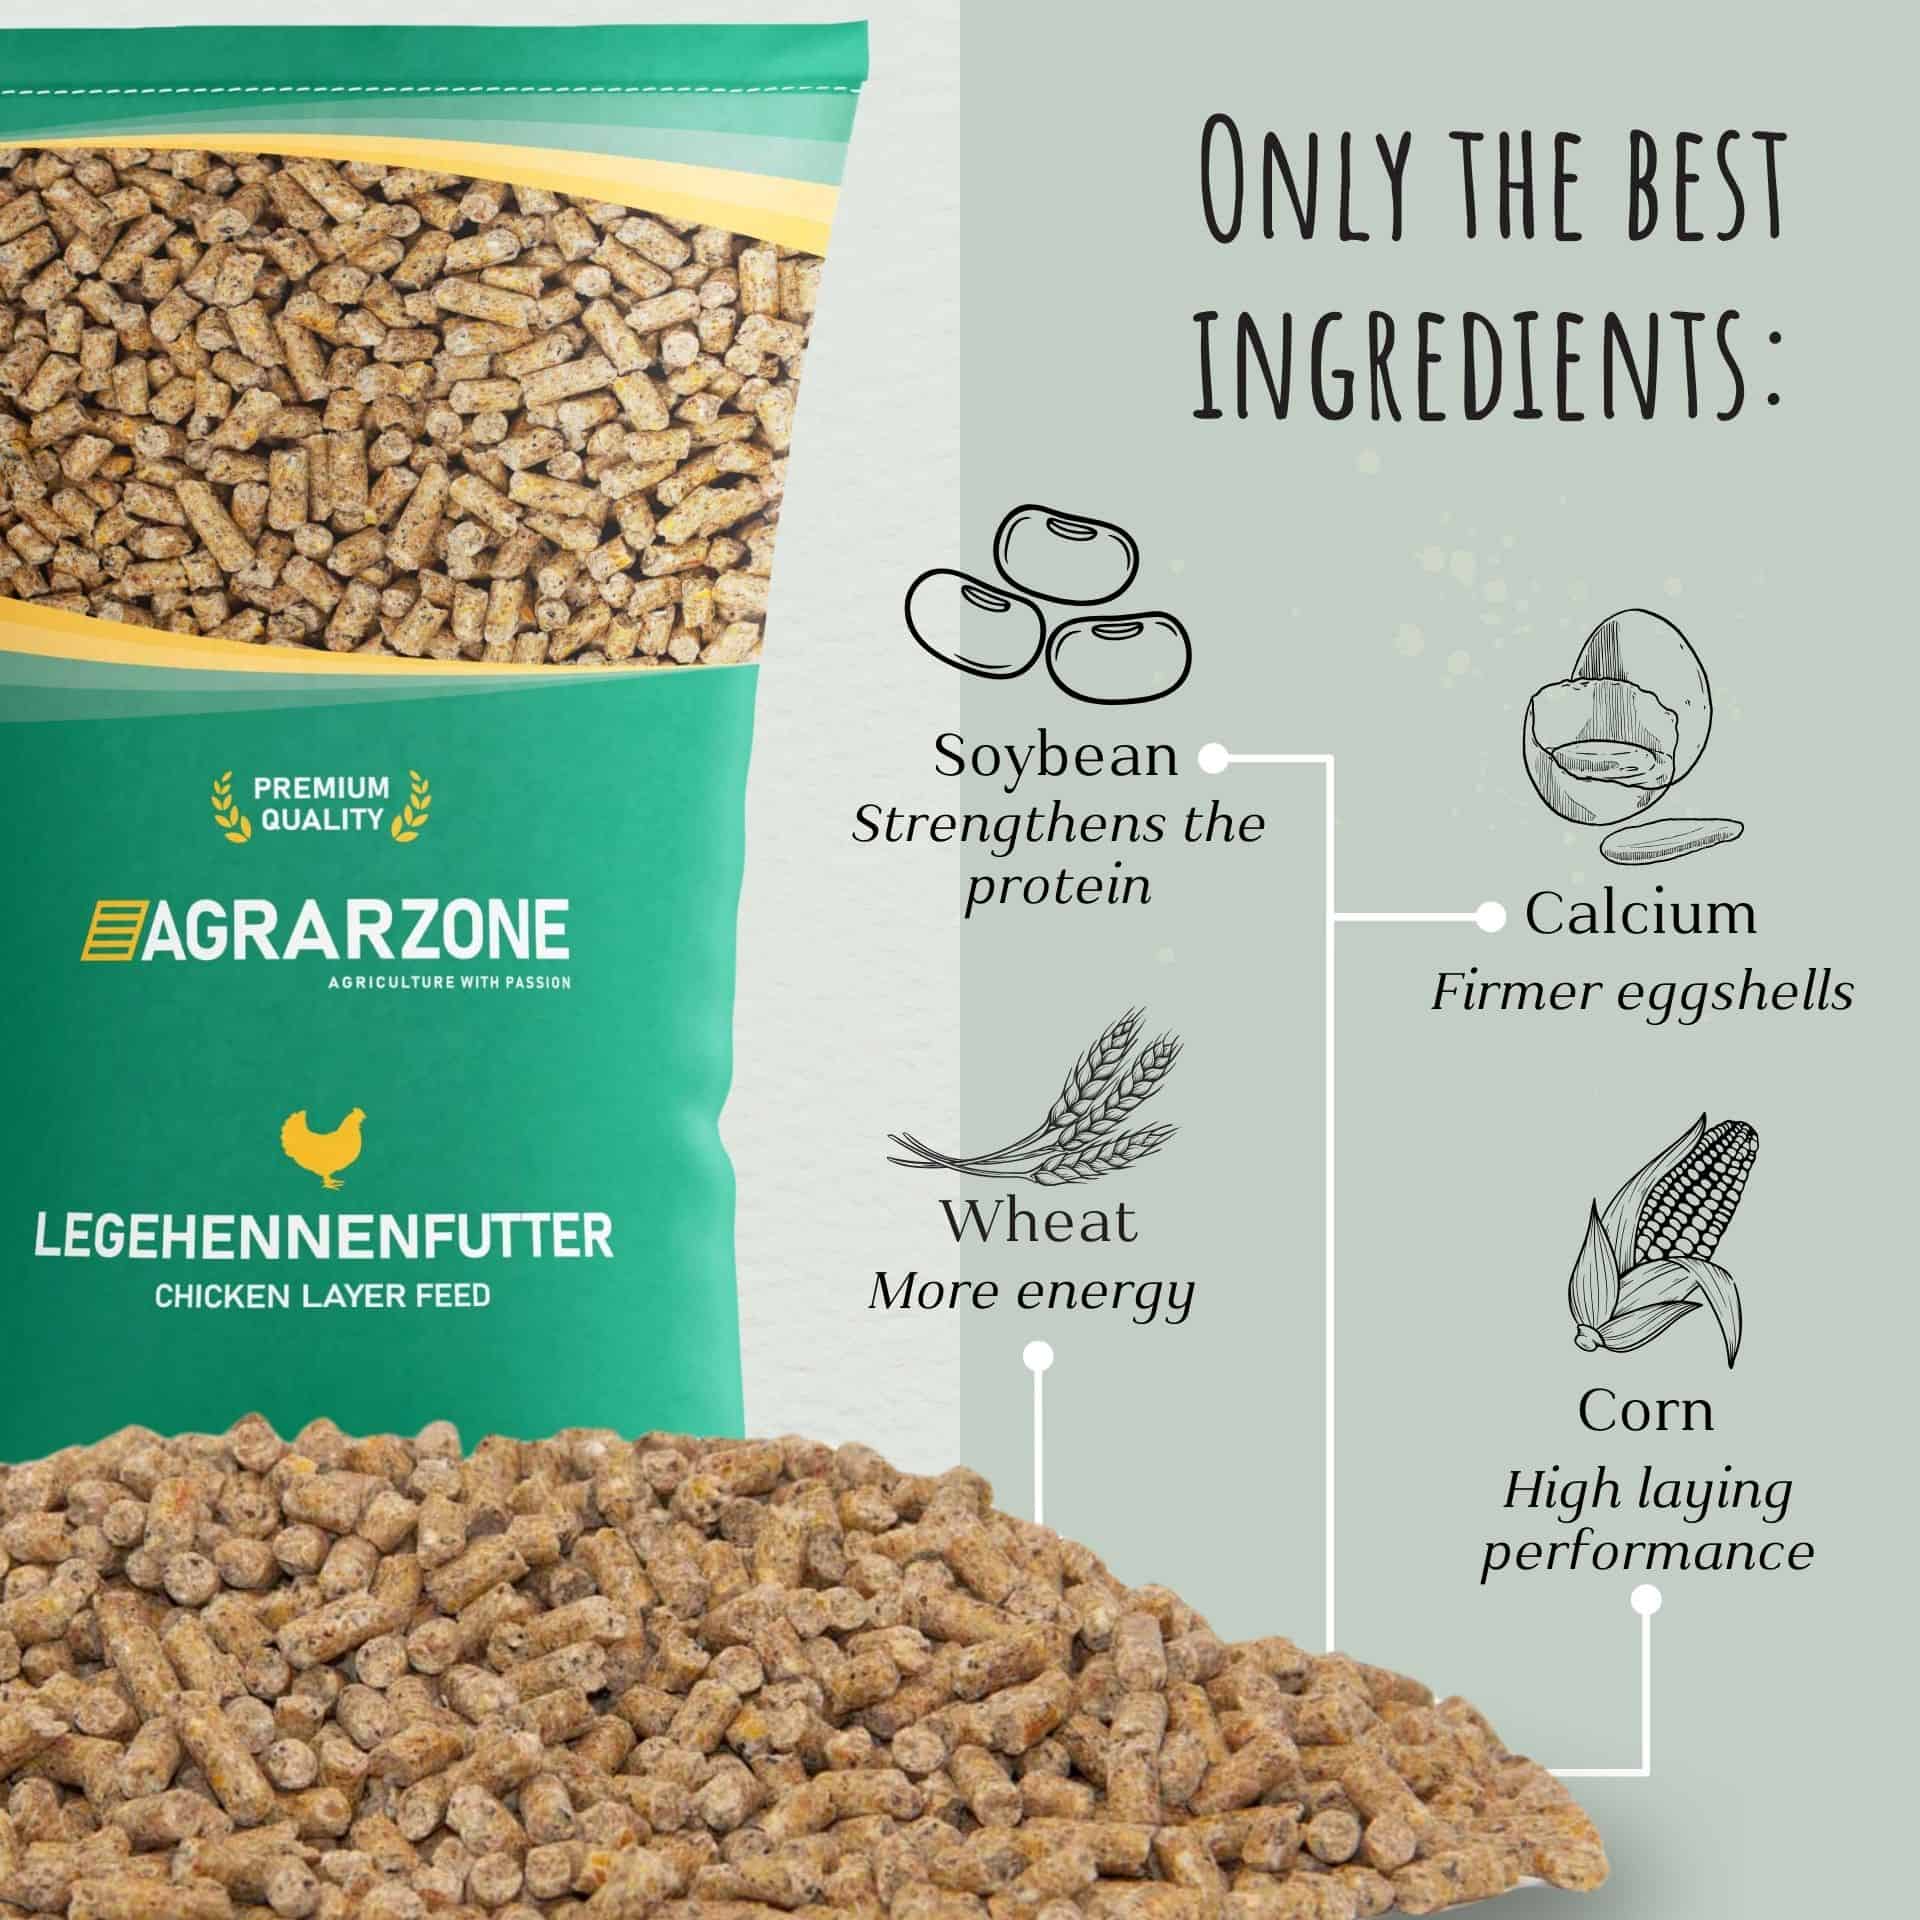 Agrarzone Chicken Layer Feed Premium Pellets 25 kg